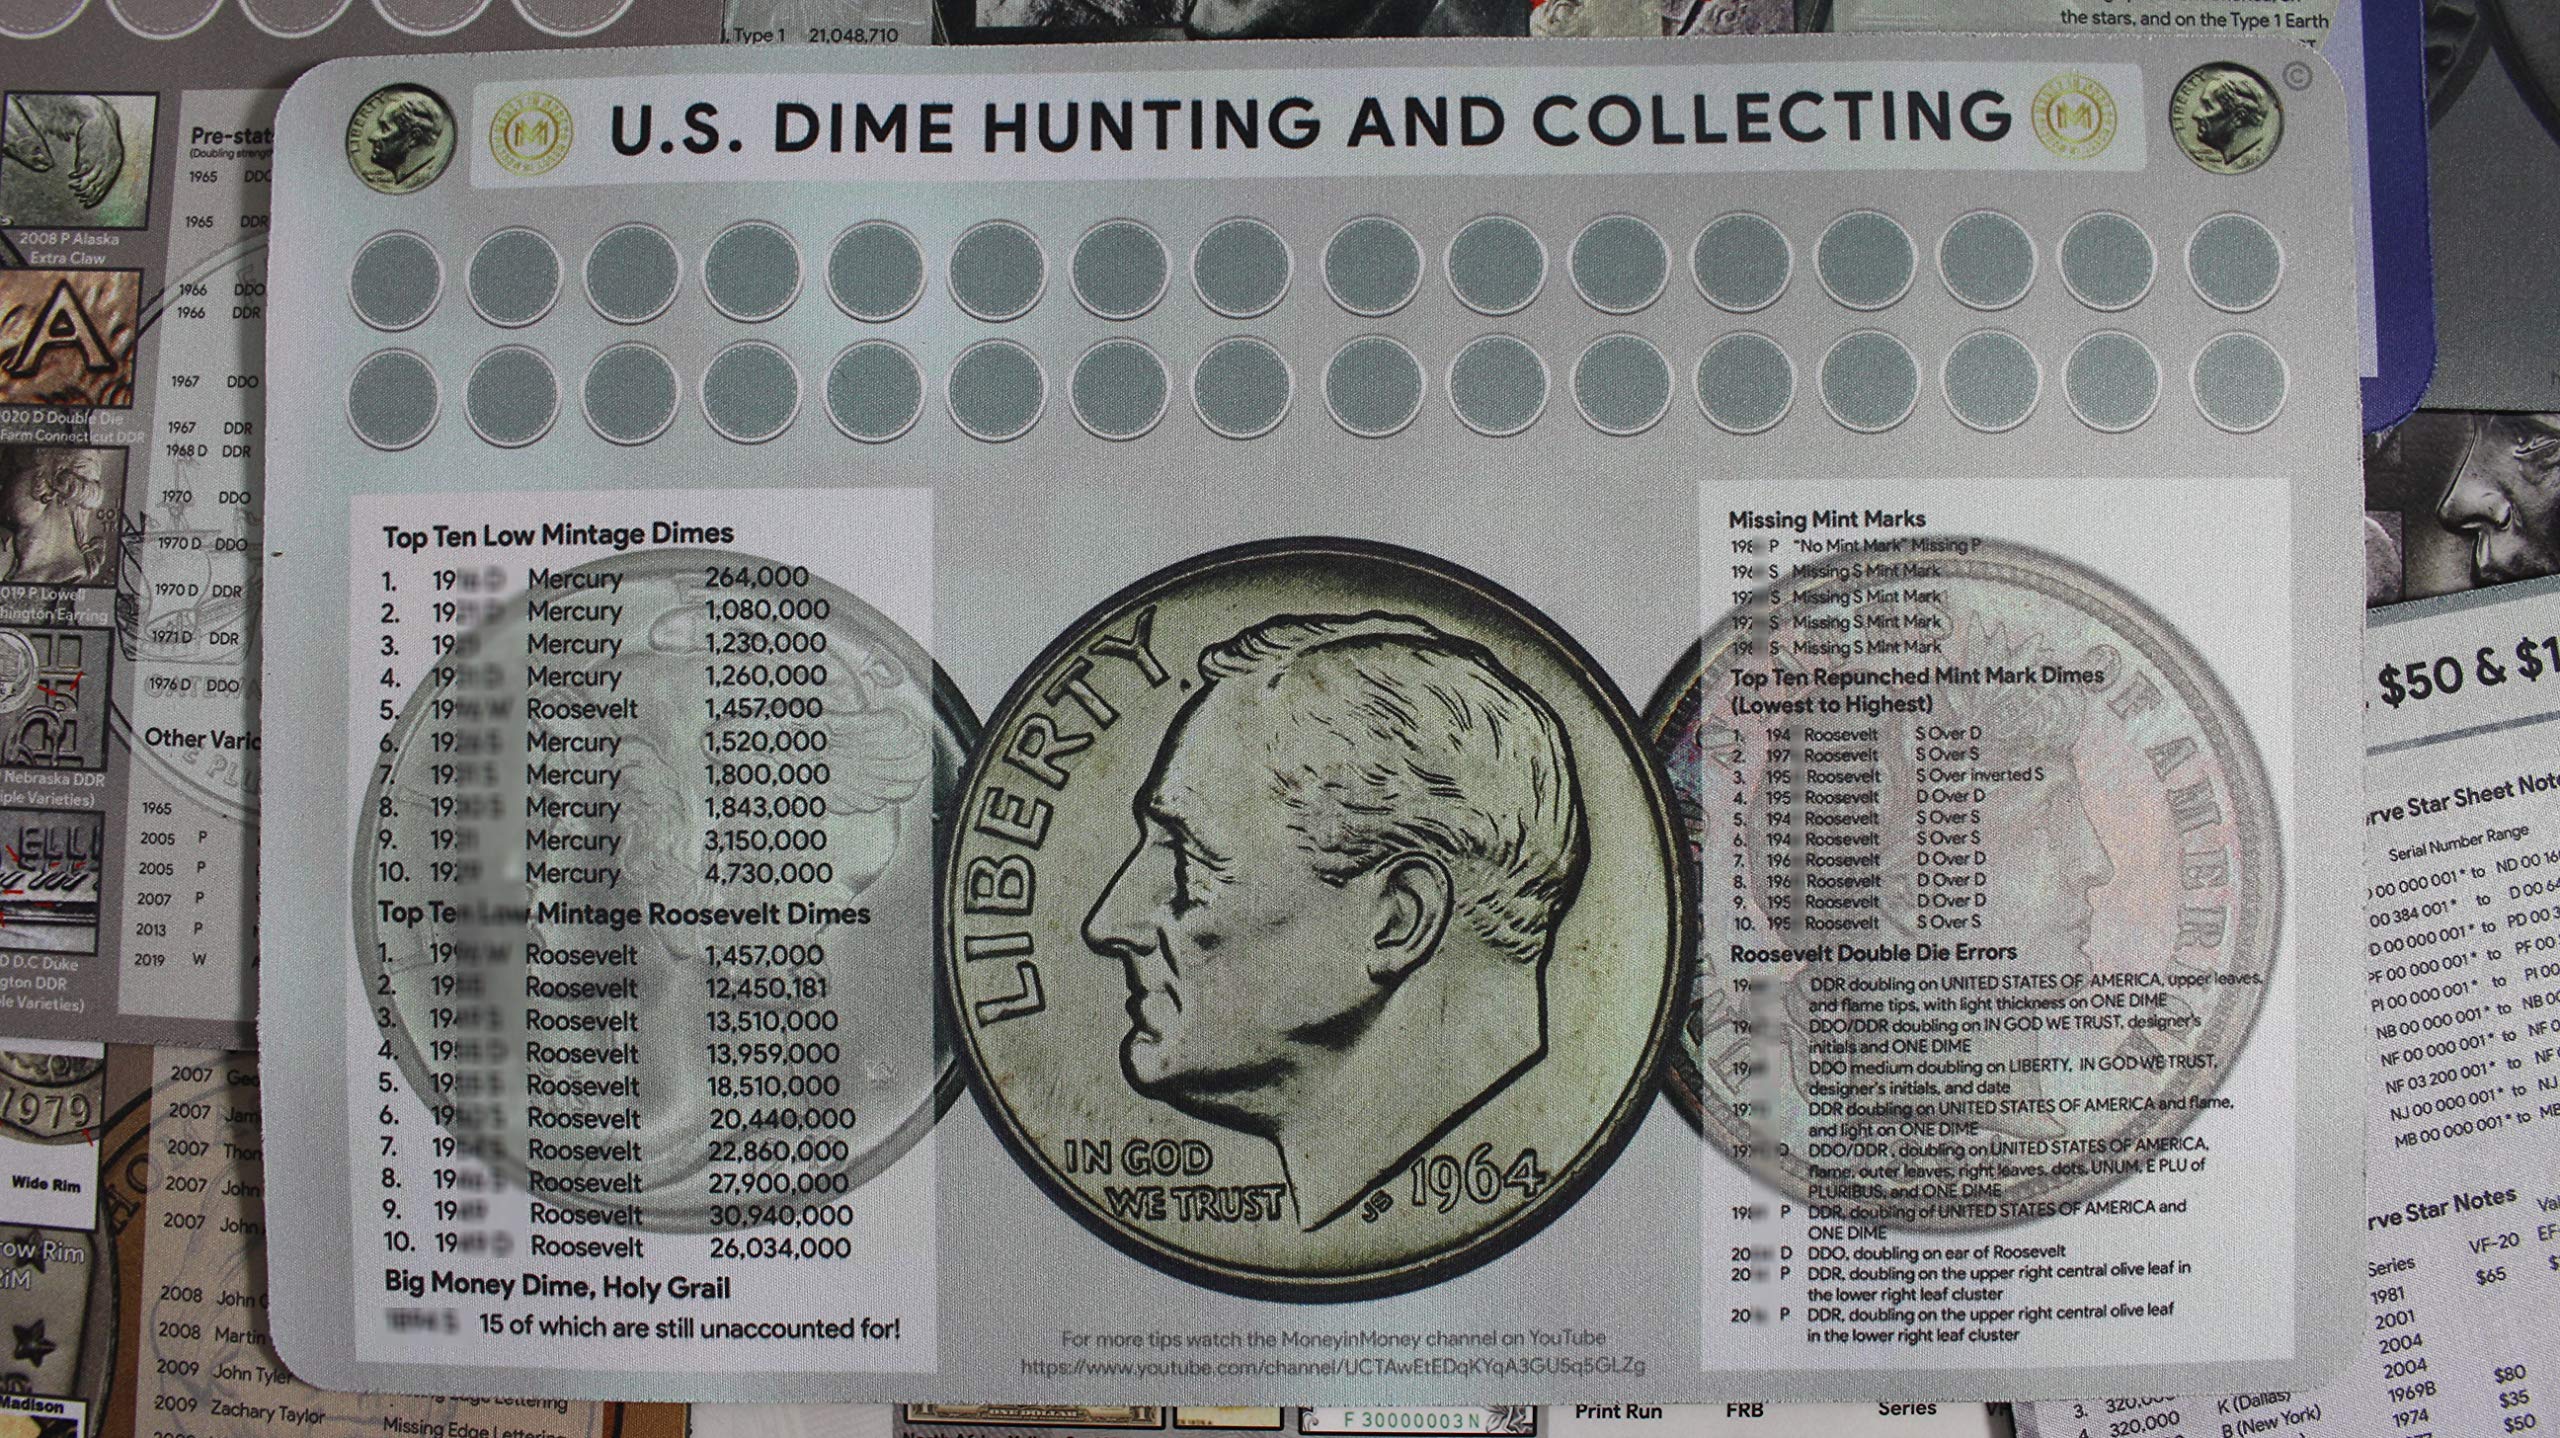 U.S. Dime Hunting and Collecting 11" x 17" Coin Roll Mat Rubber and Cloth